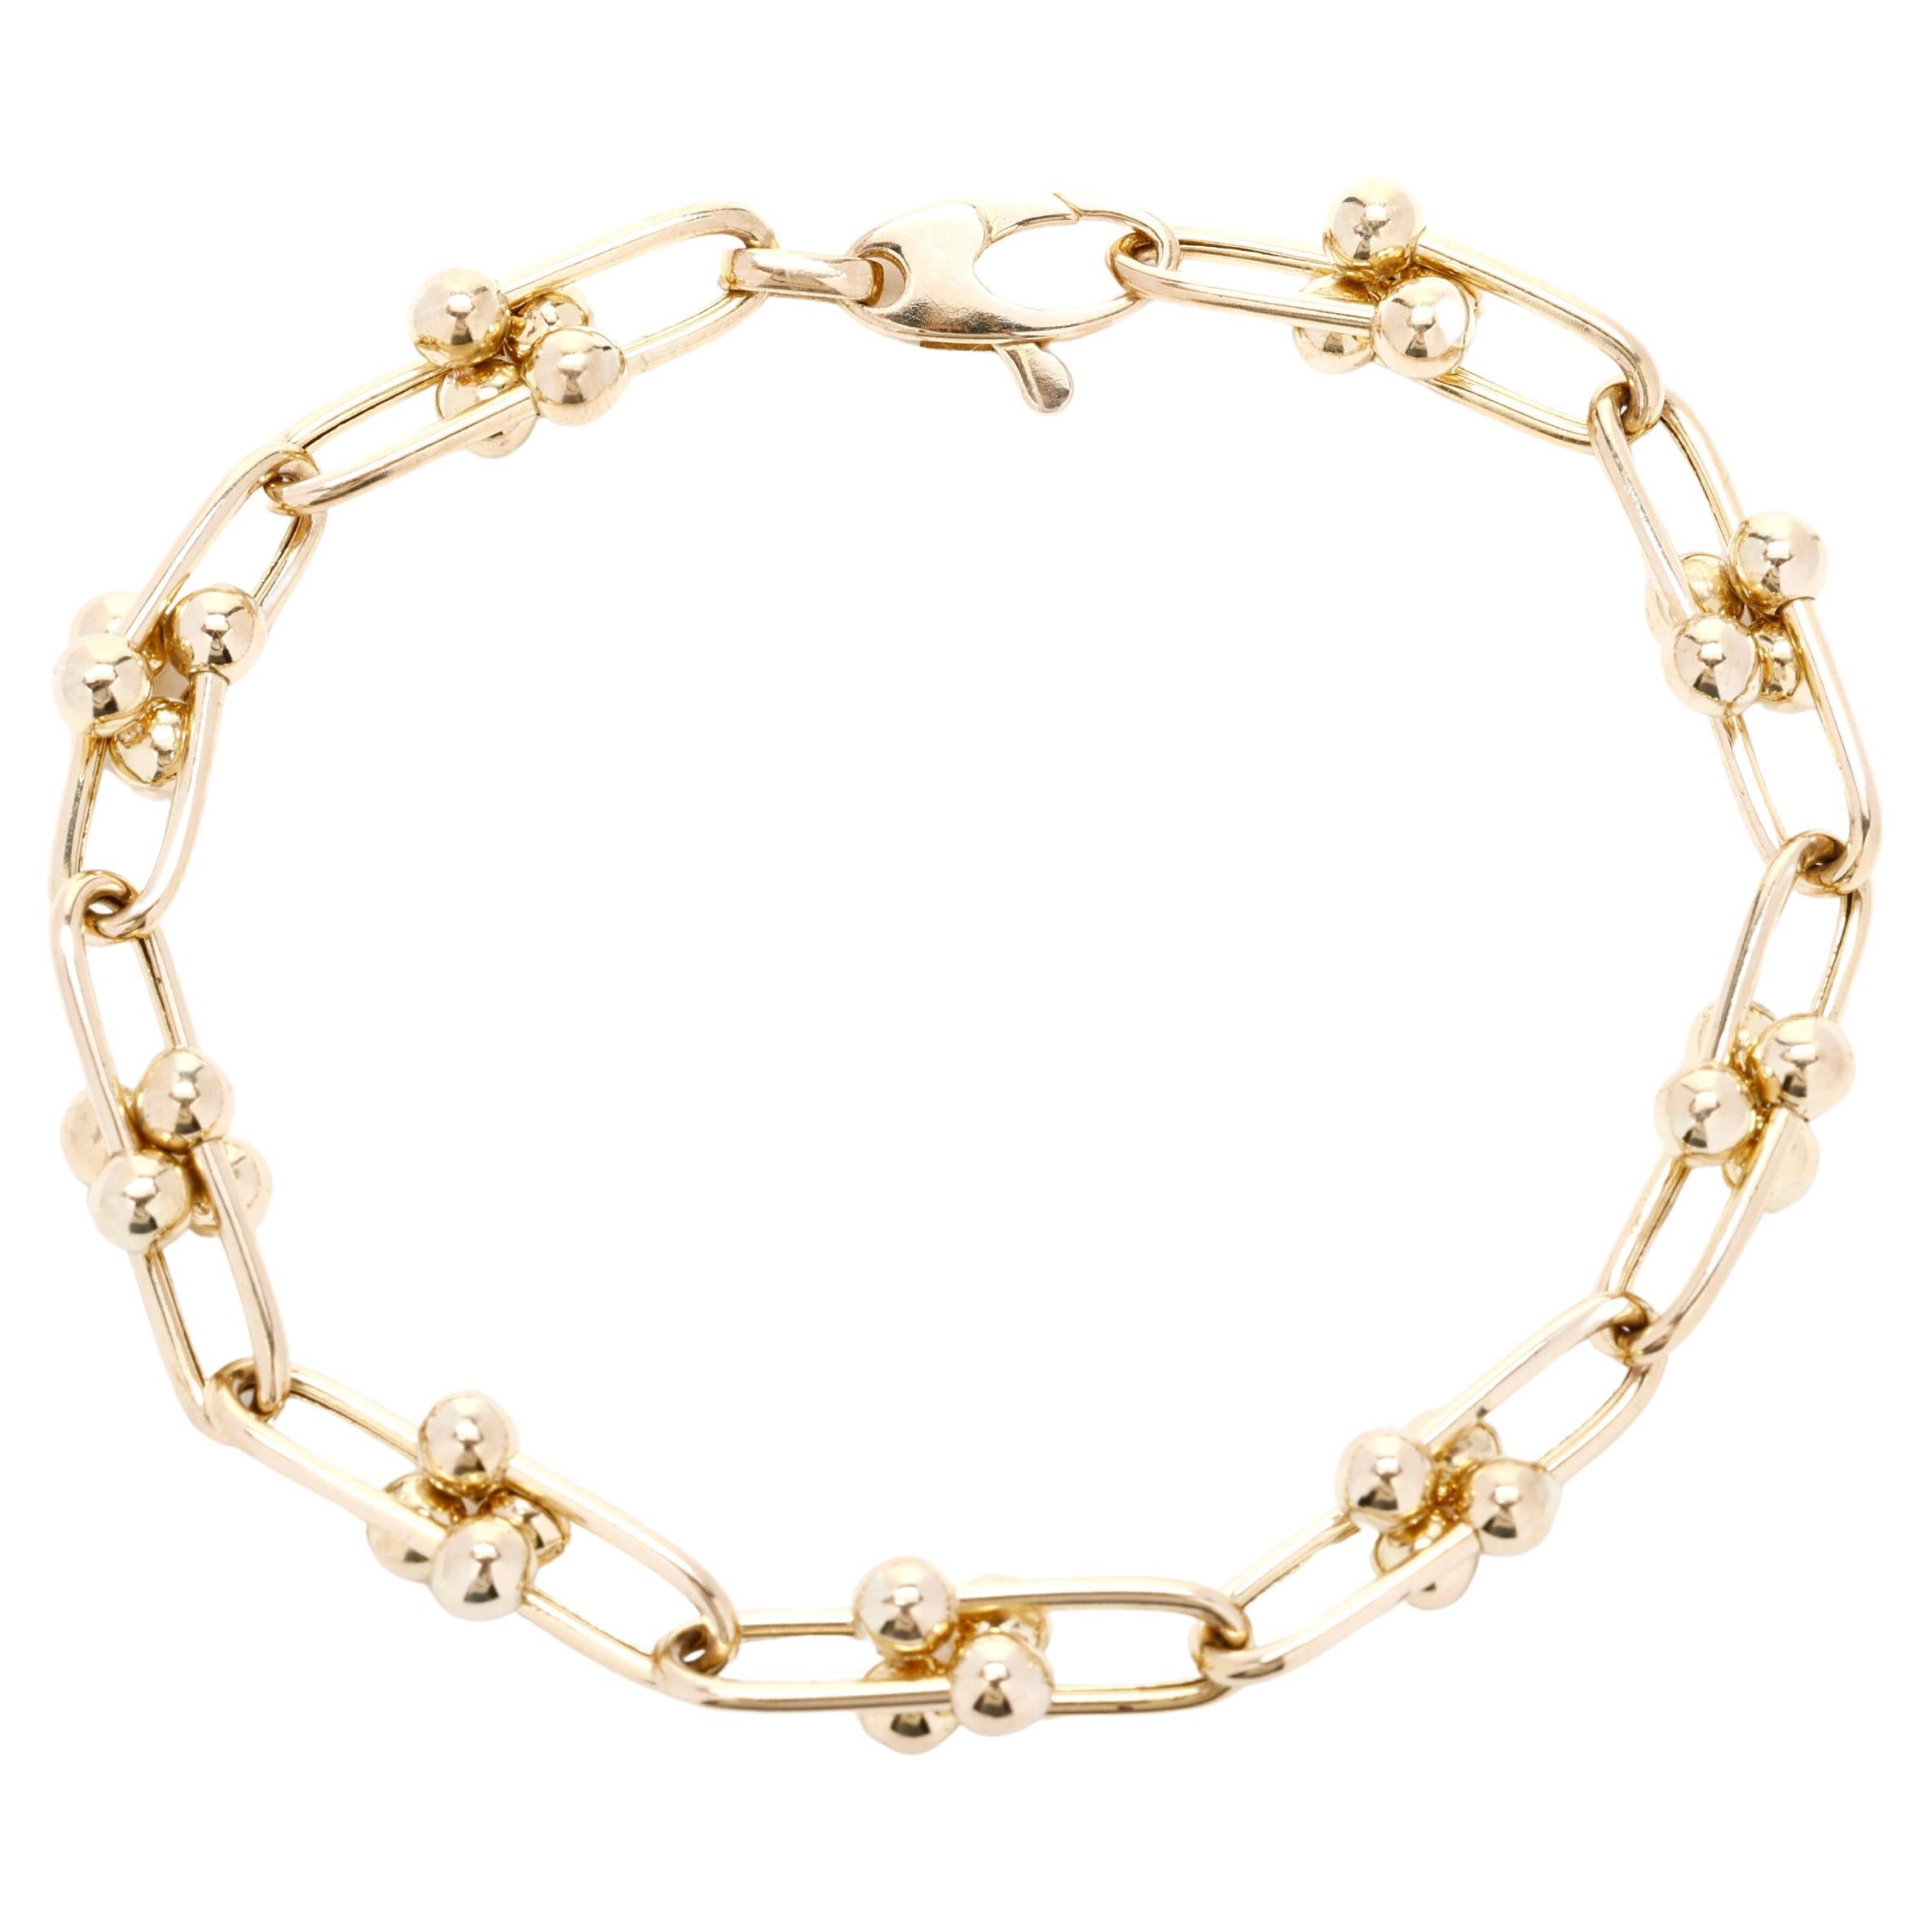 14k Yellow Gold Link Bracelet, Length 7.75 Inches, Everyday Wear, Stackable